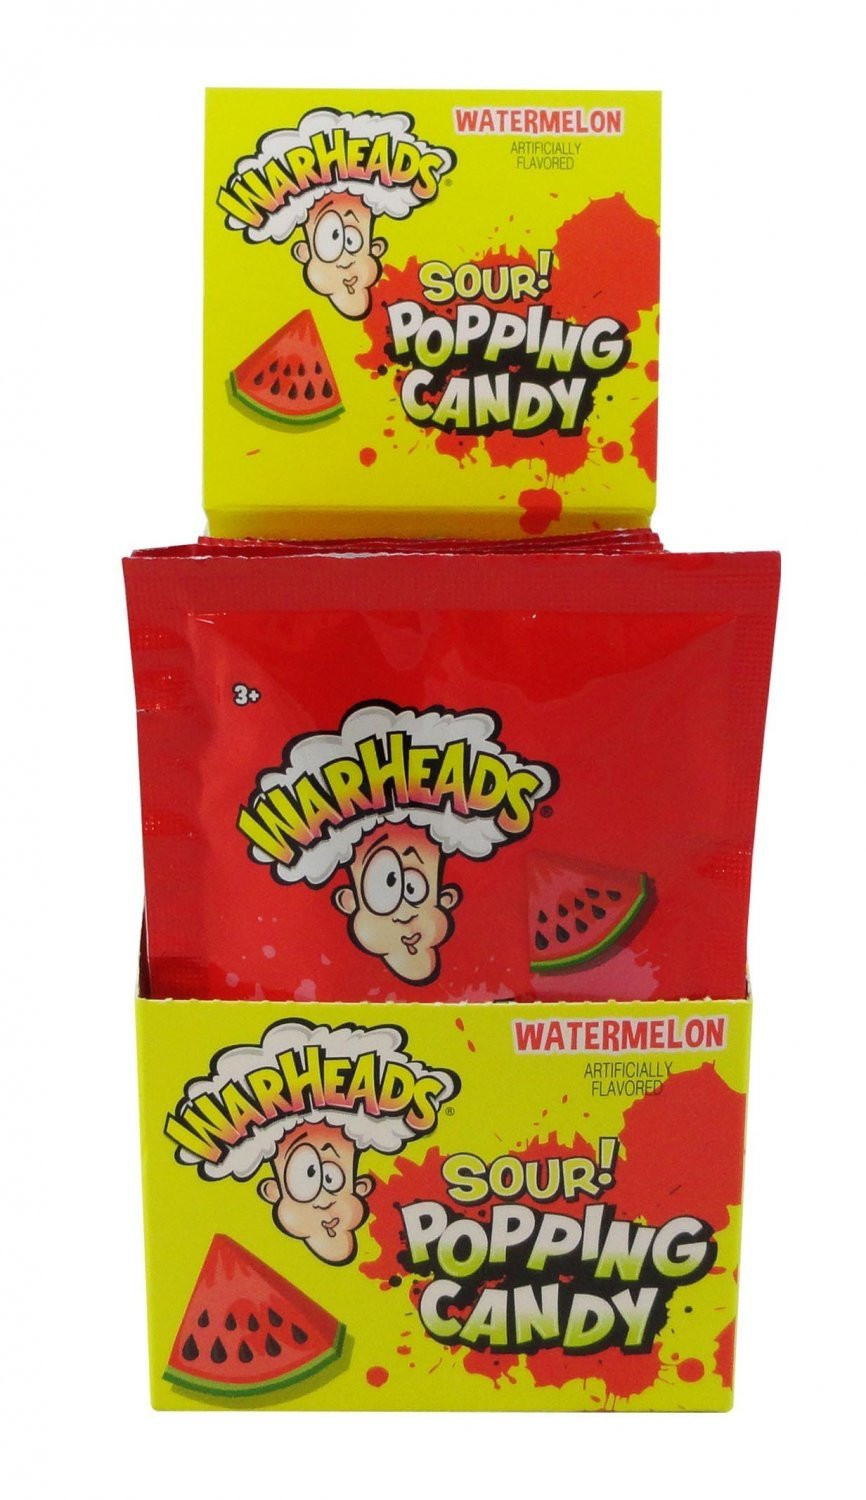 Waheads Warheads SOUR Watermelon Popping Candy Single Pouch .33oz. 